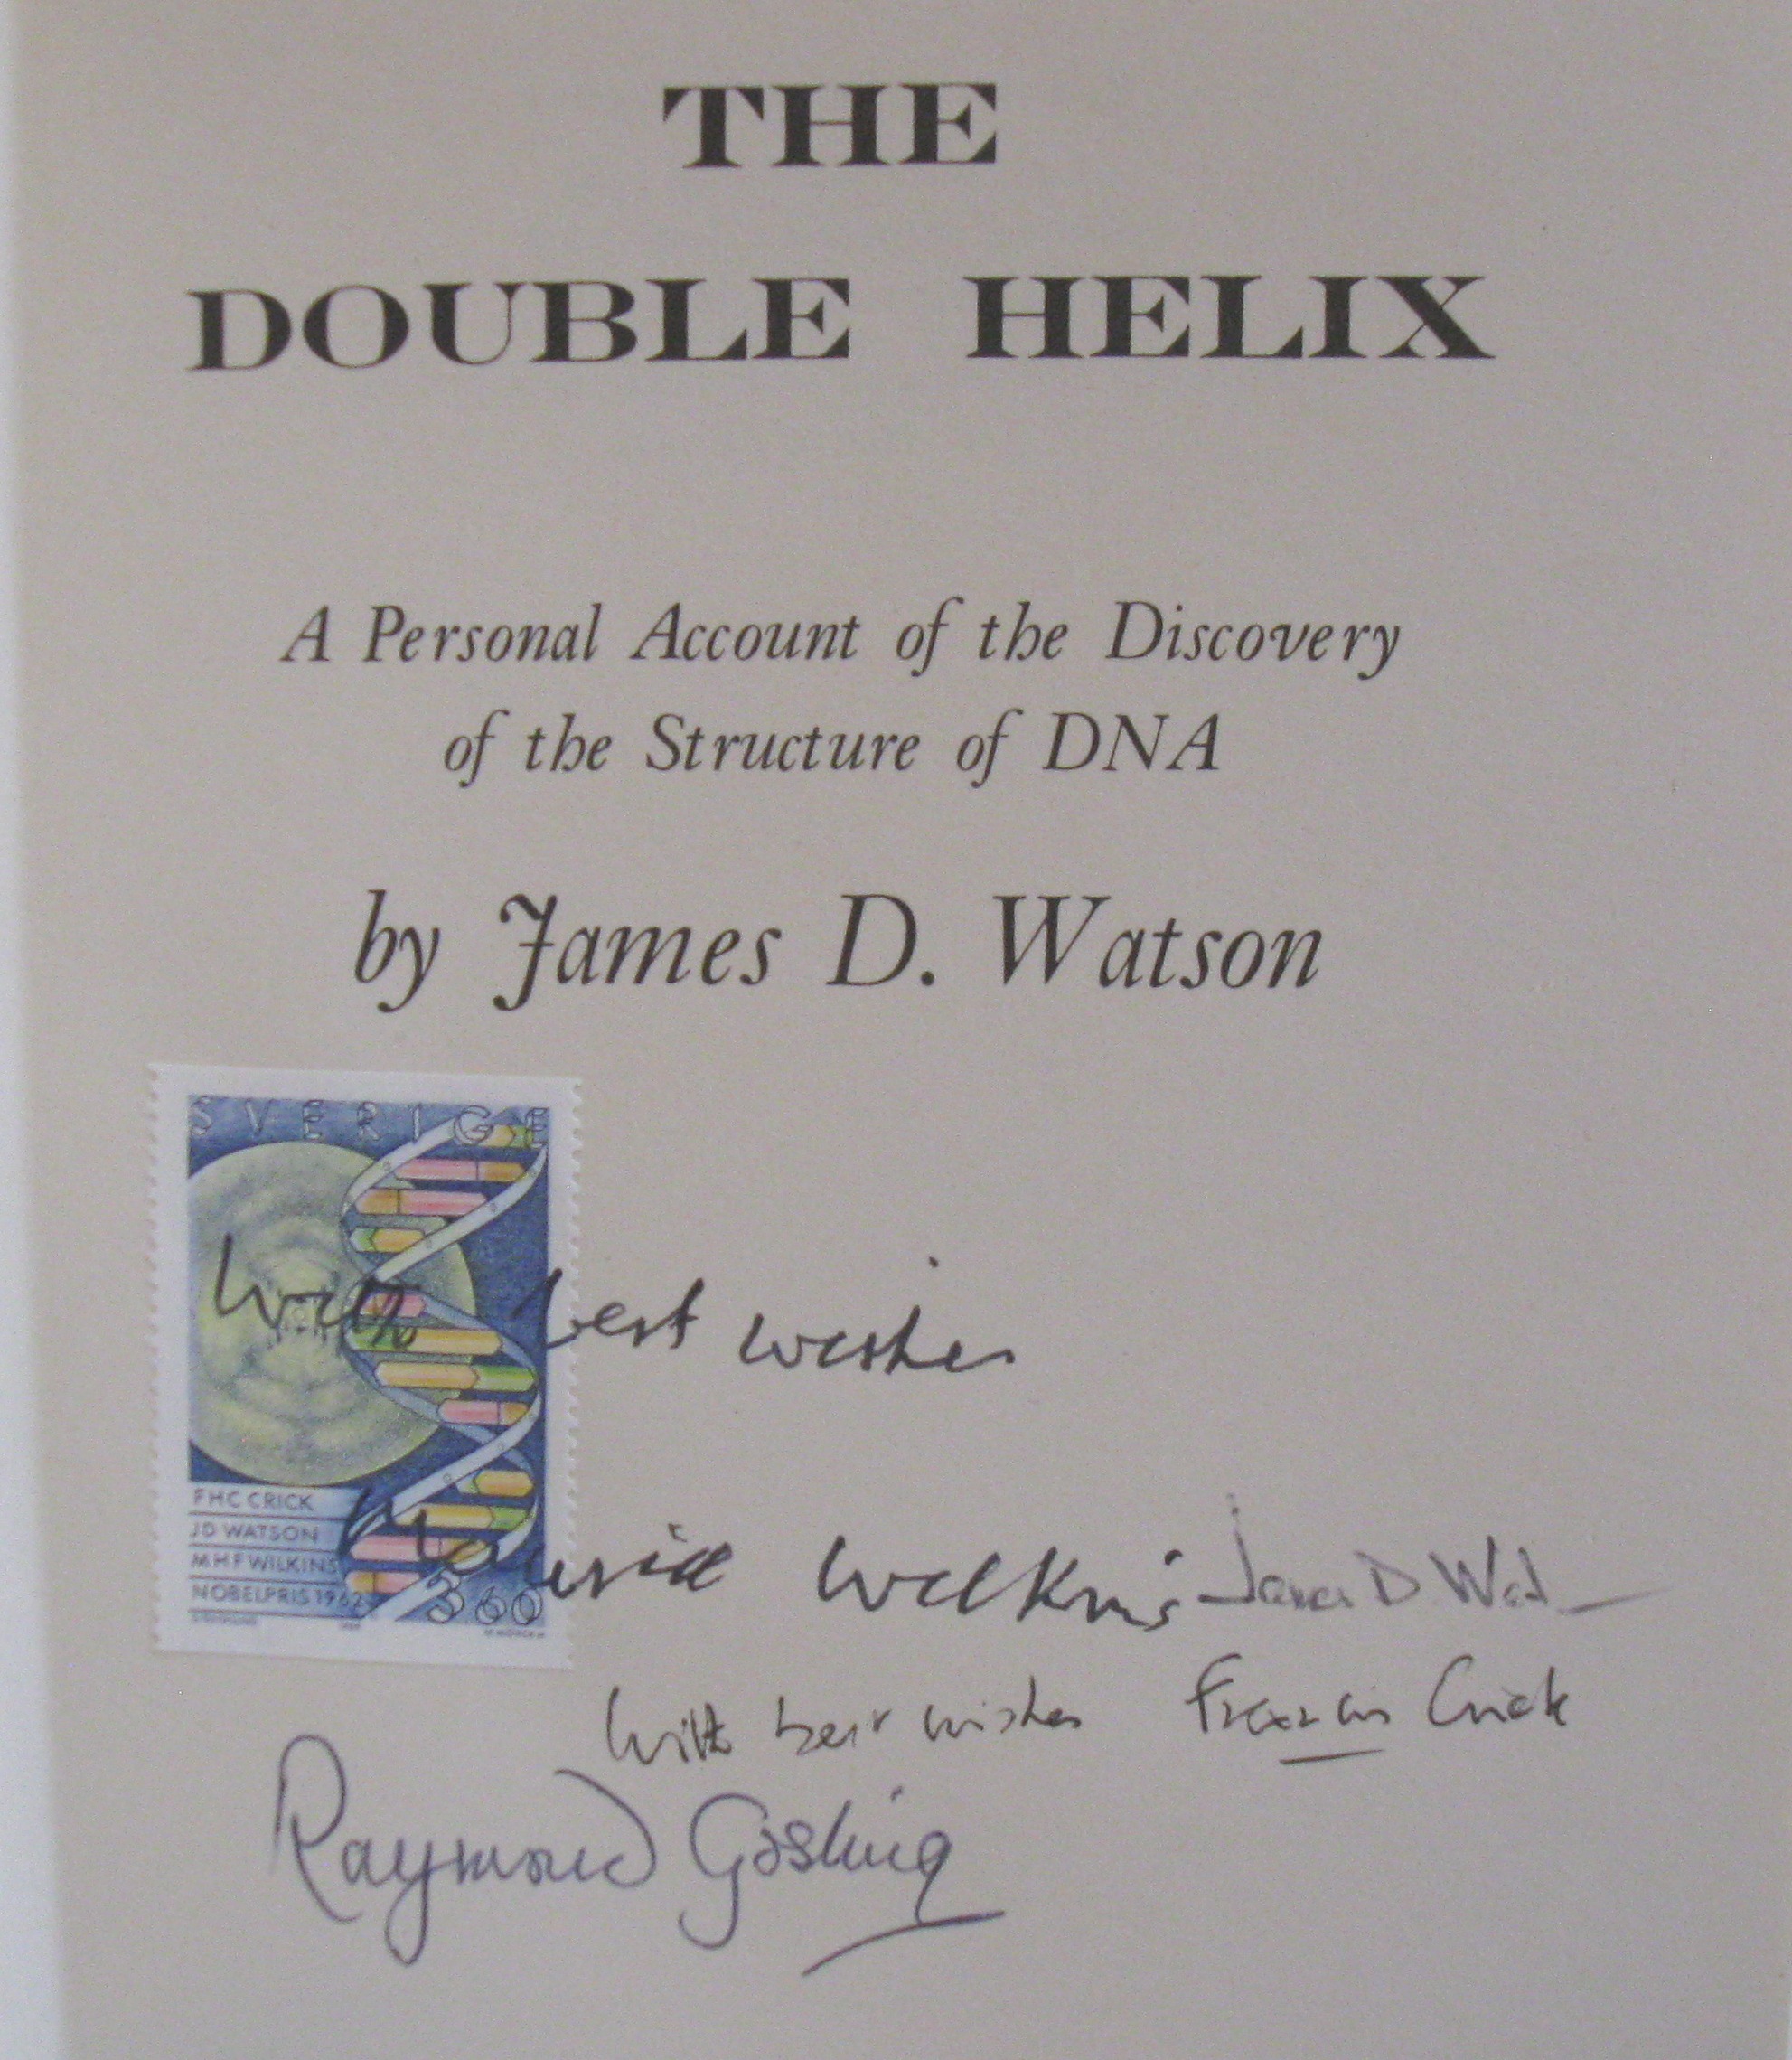 James Watson Signed First edition A Passion for DNA